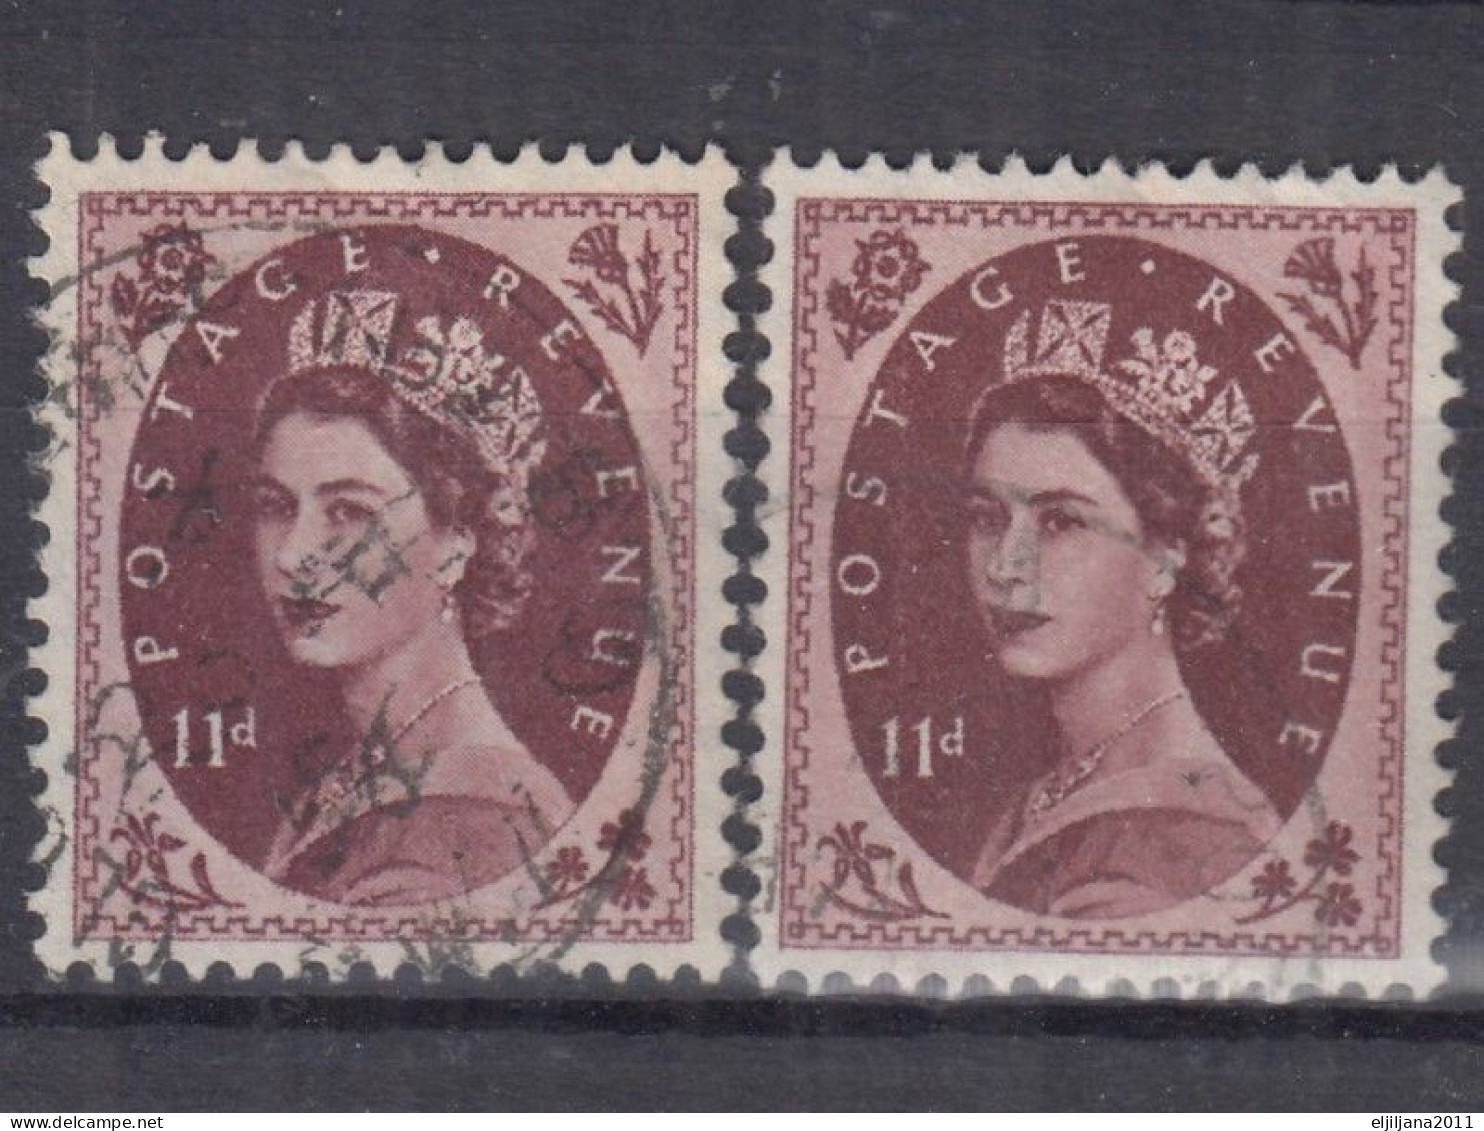 Great Britain - GB / UK / QEII. 1952 - 1967 ⁕ Queen Elizabeth II. ⁕ 98v used stamps / unchecked - see all scan